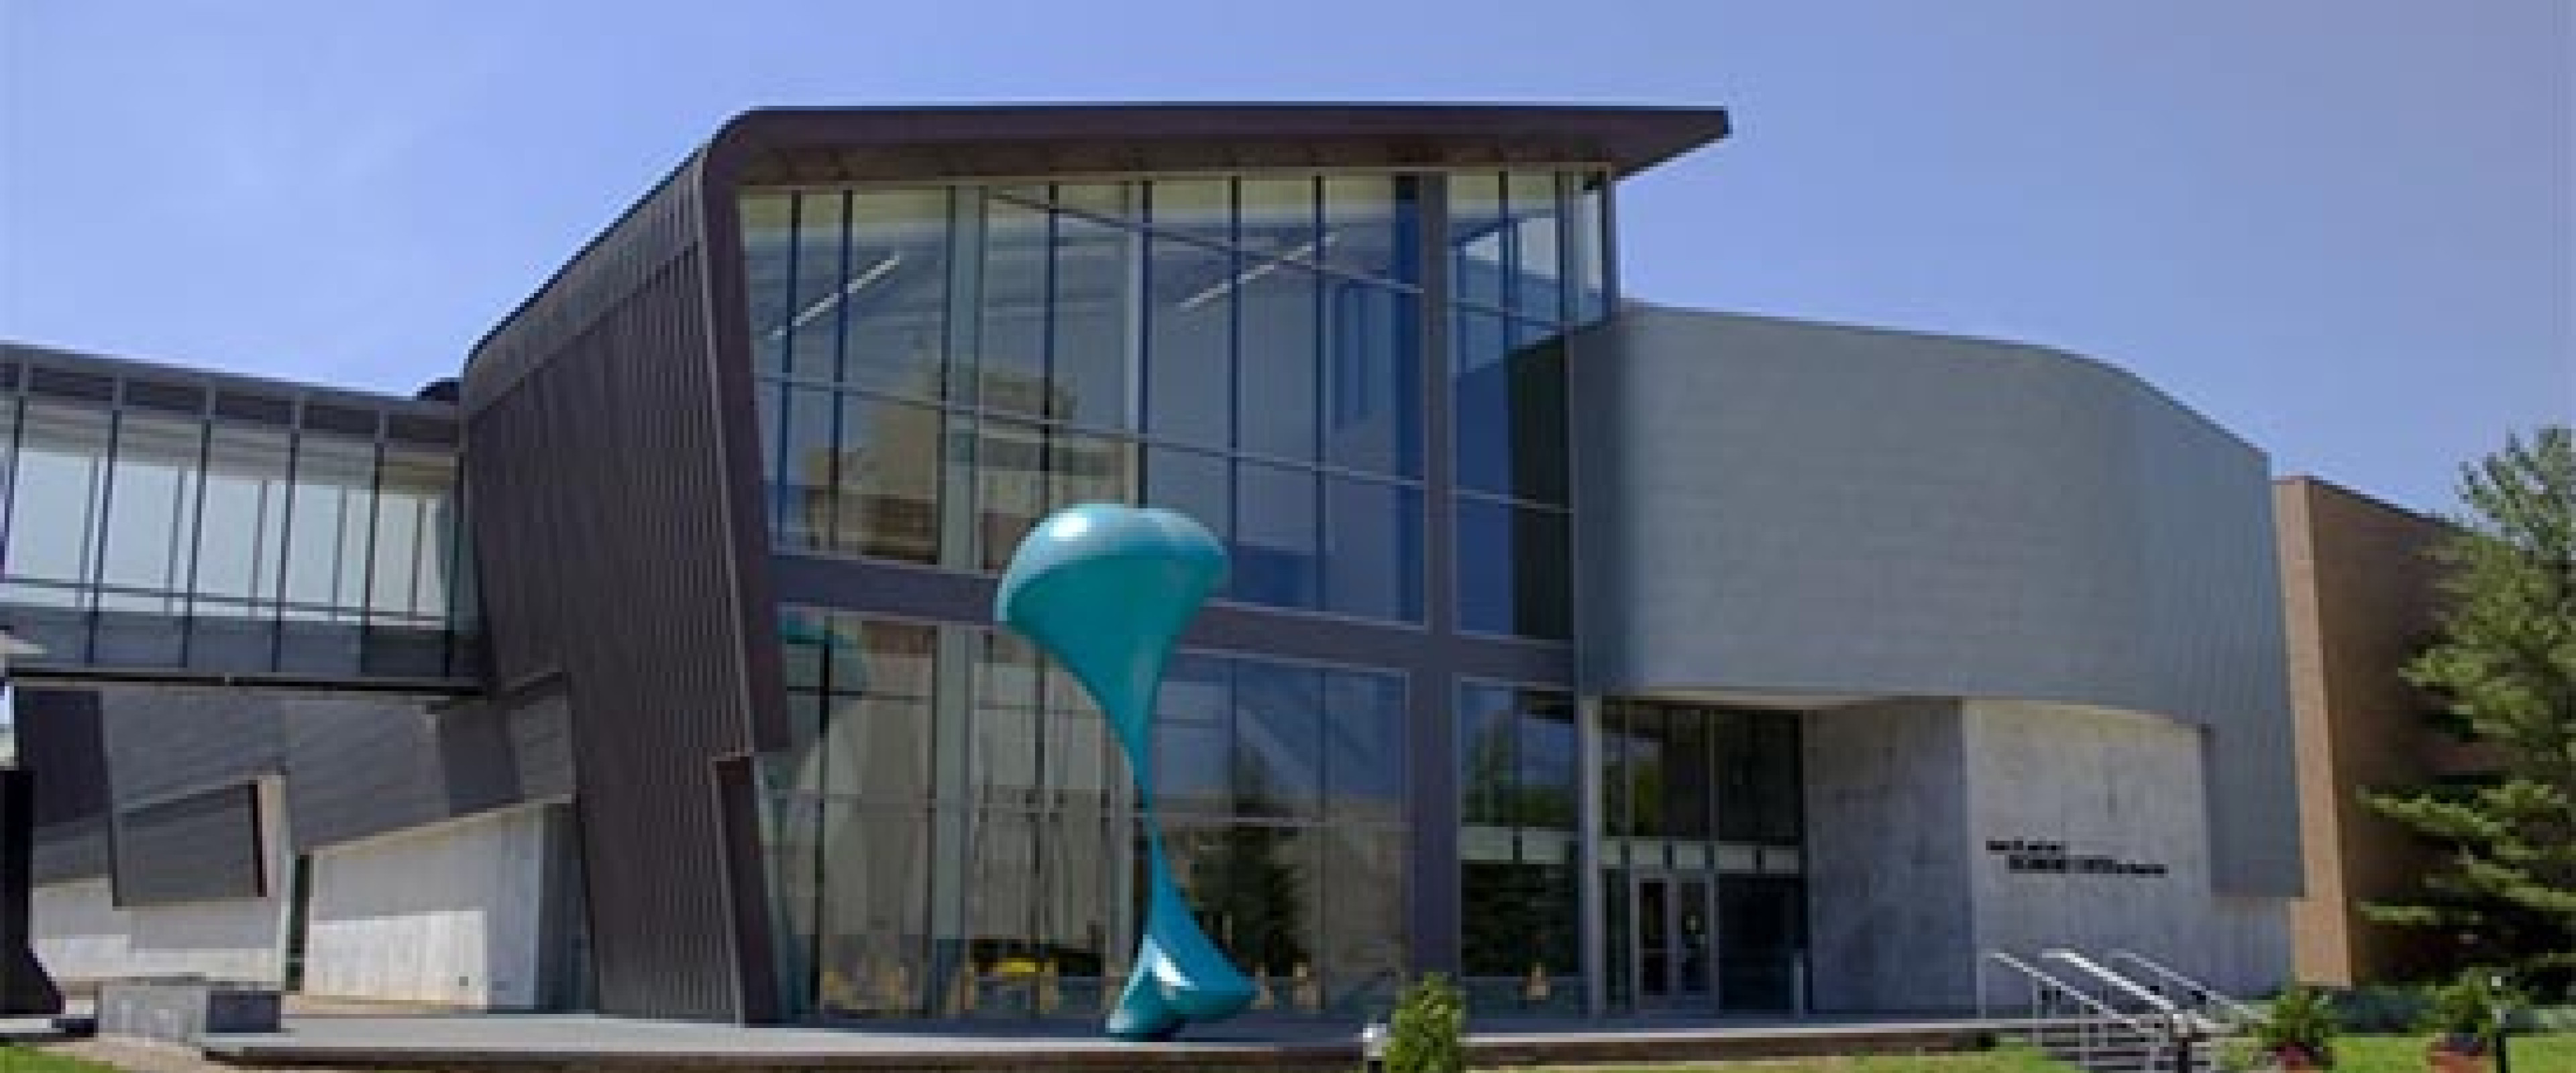 The front of the Richmond Center for Visual Arts.